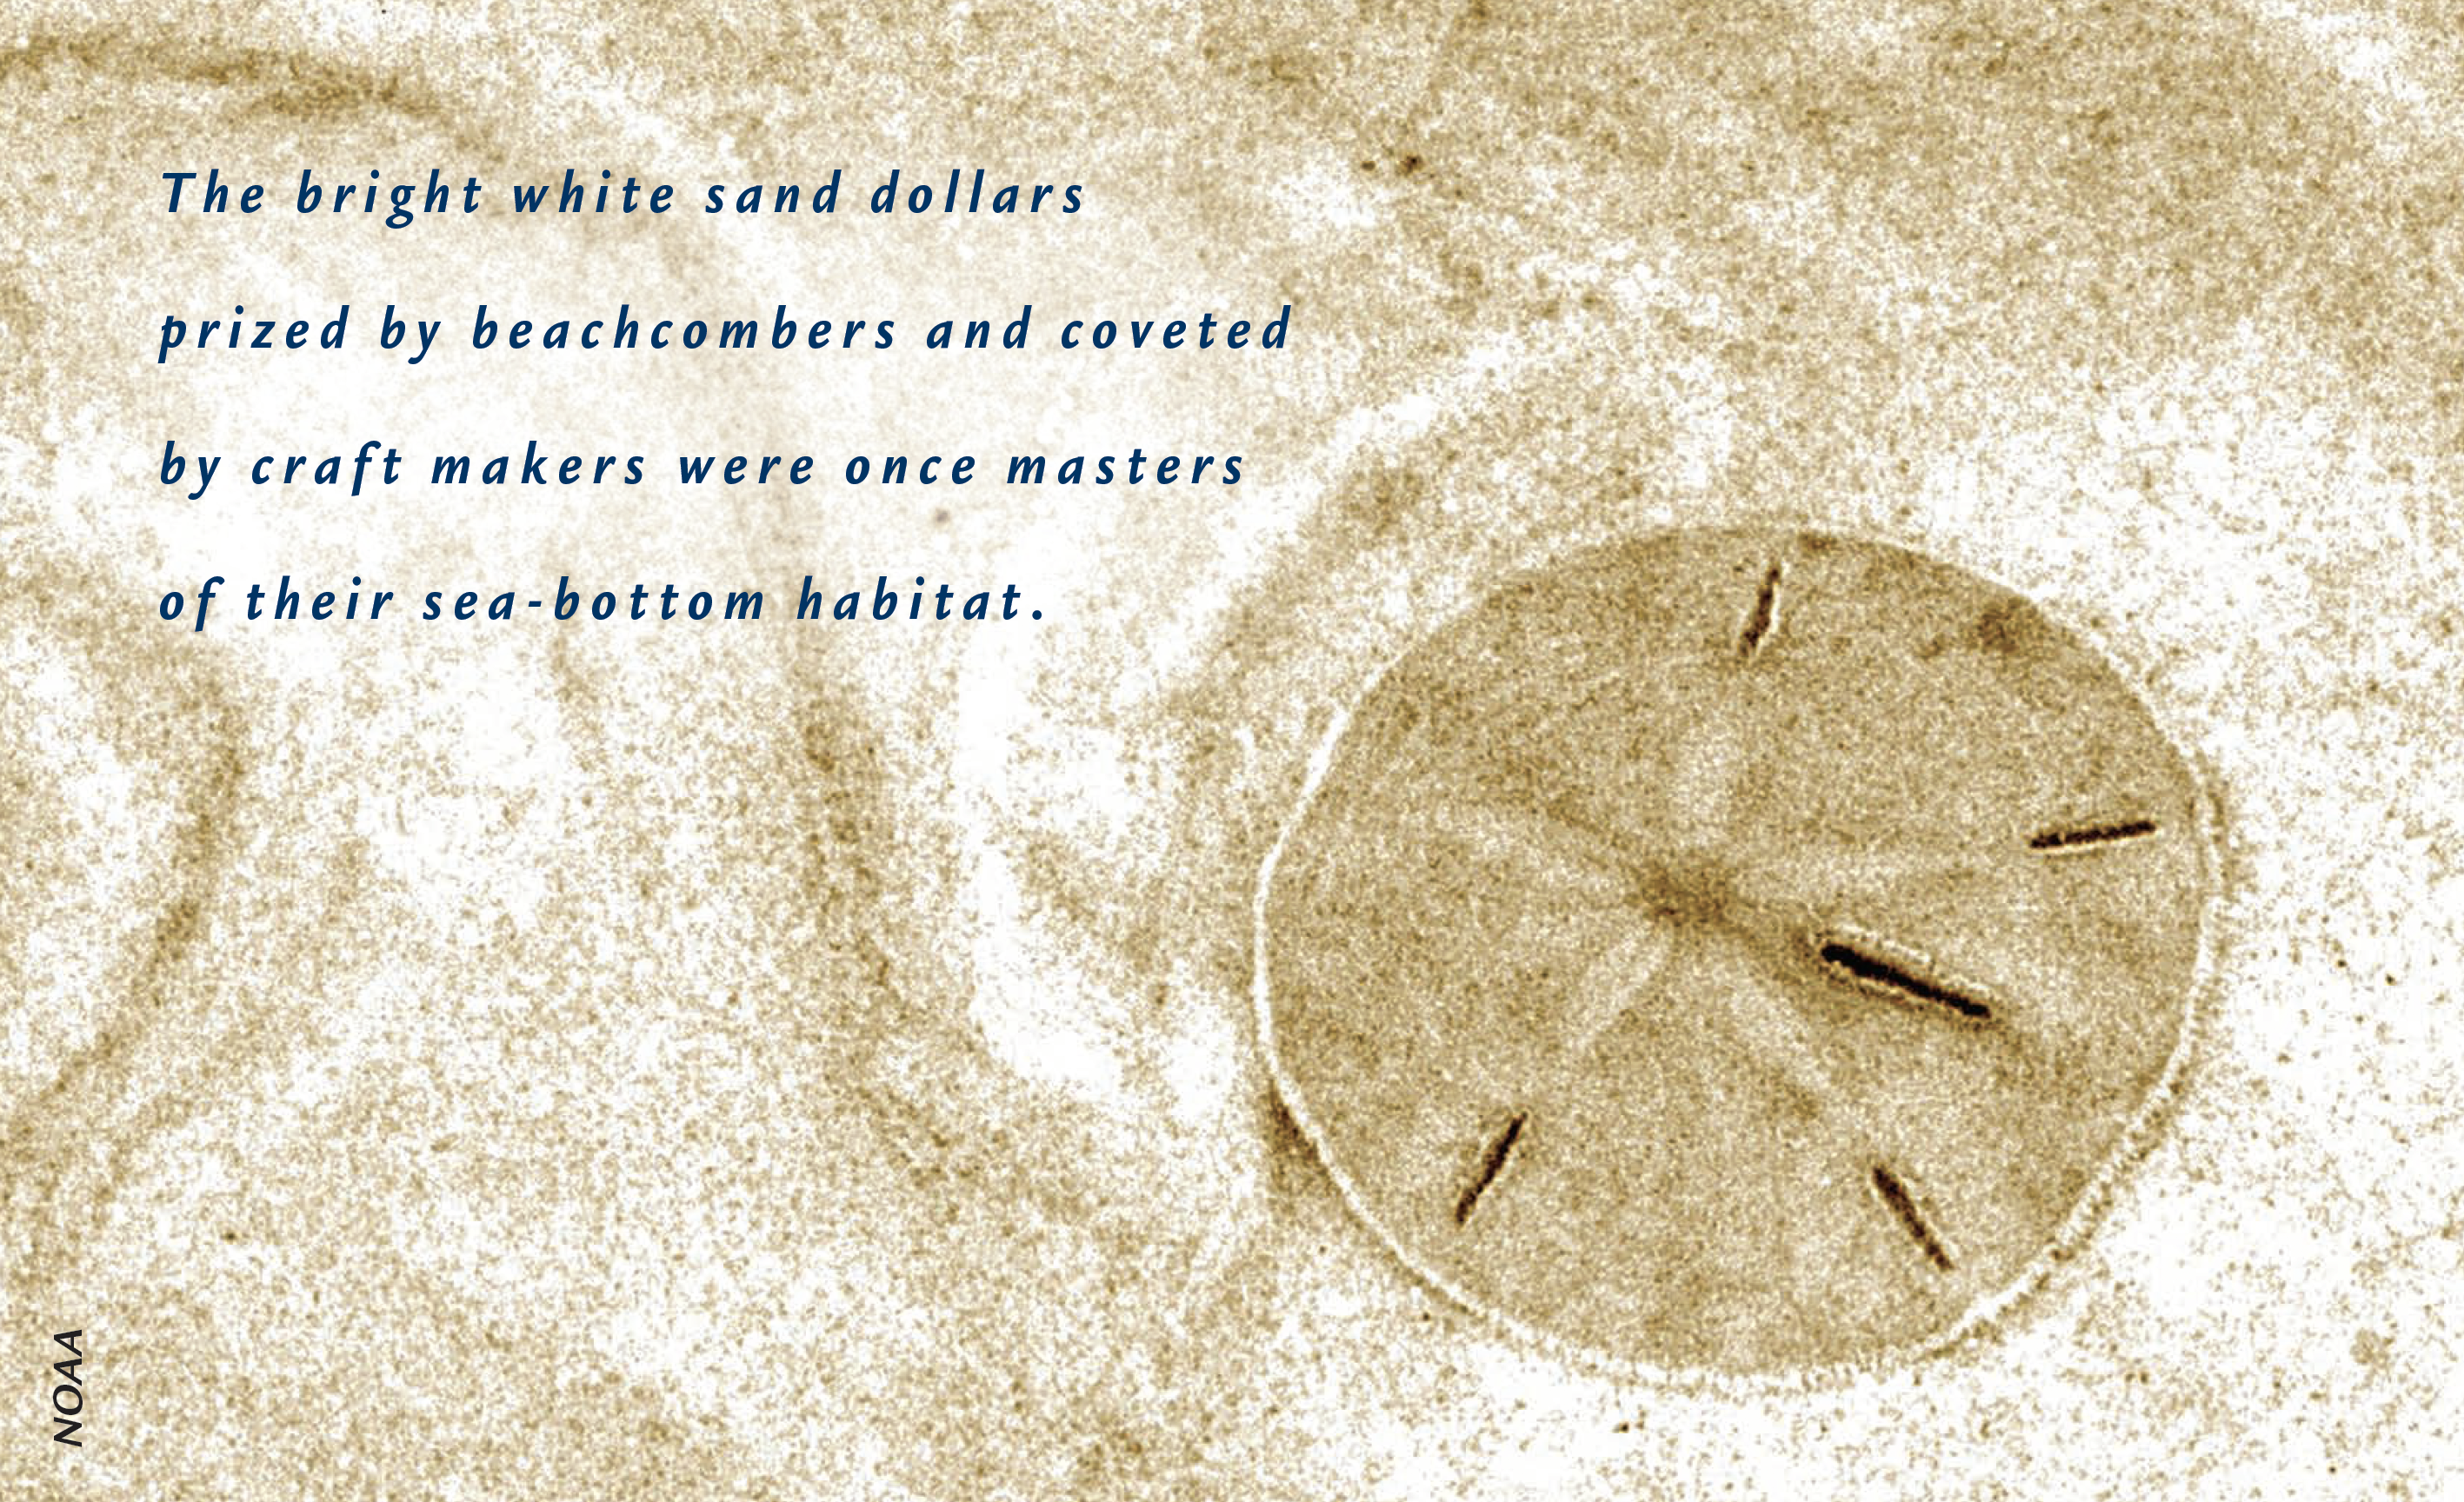 Parable of the sand dollars. One day, when I was walking along the